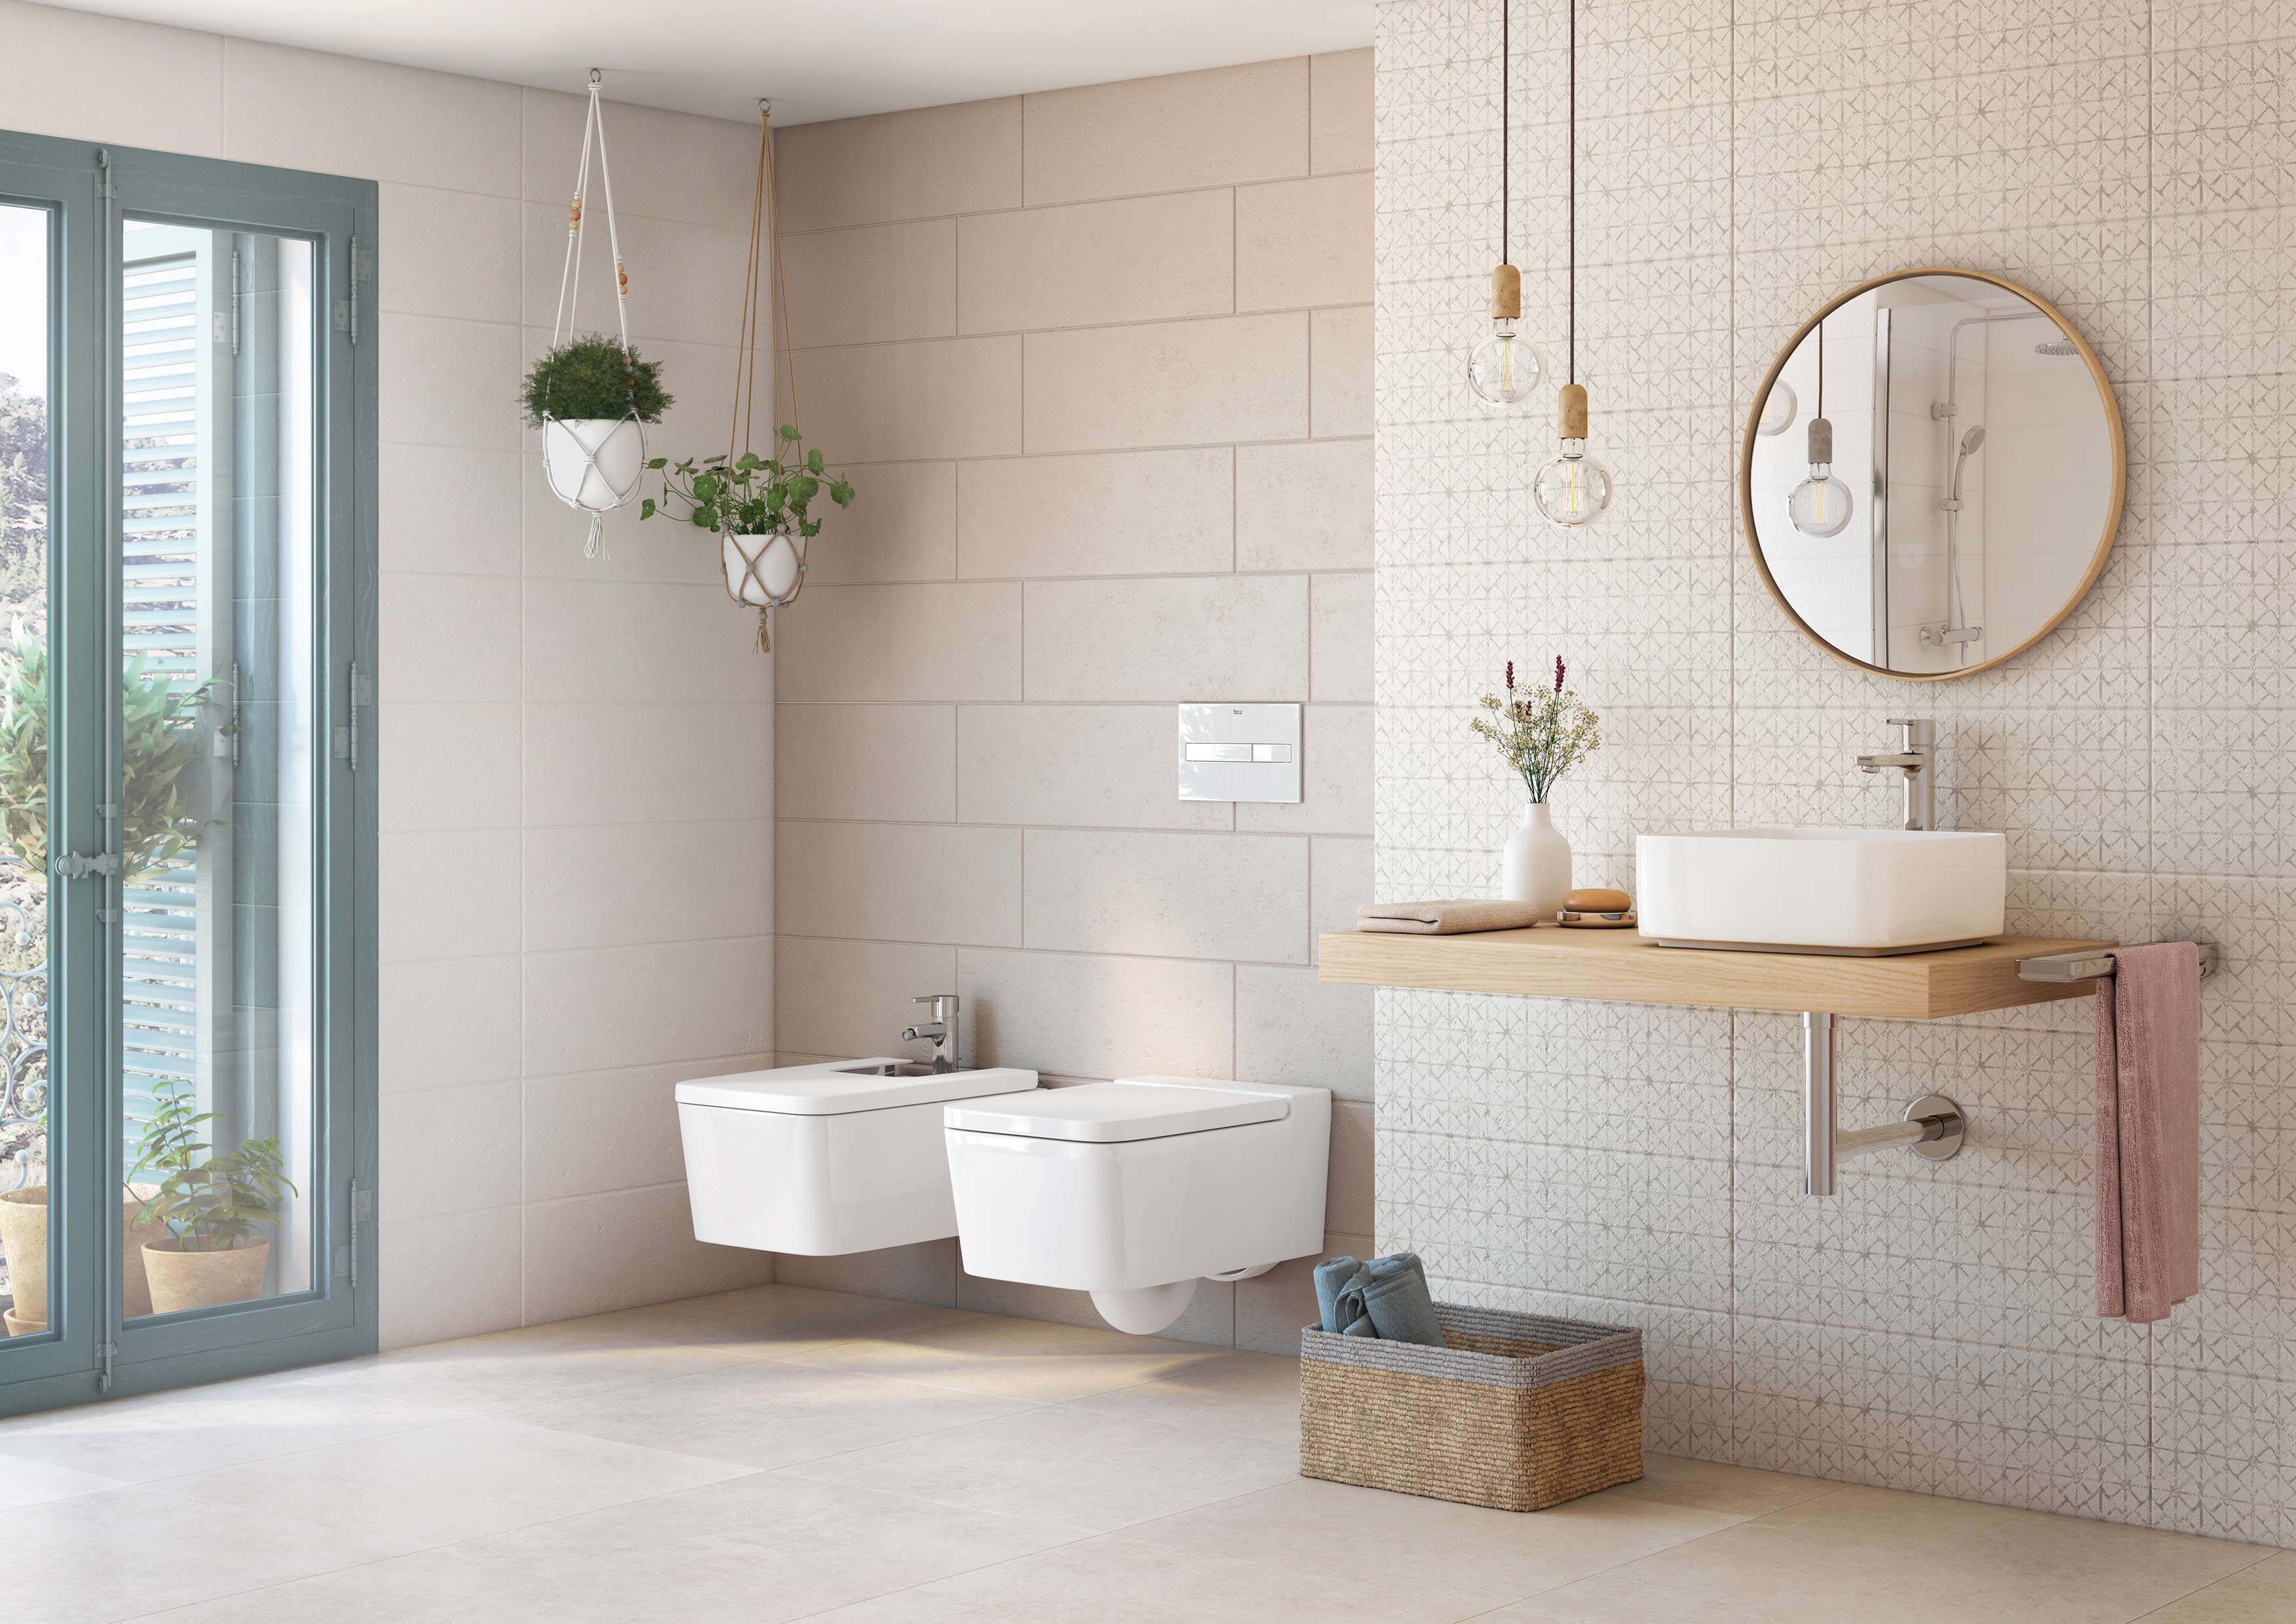 Wall-hung WC: get to know all its benefits │Roca Life